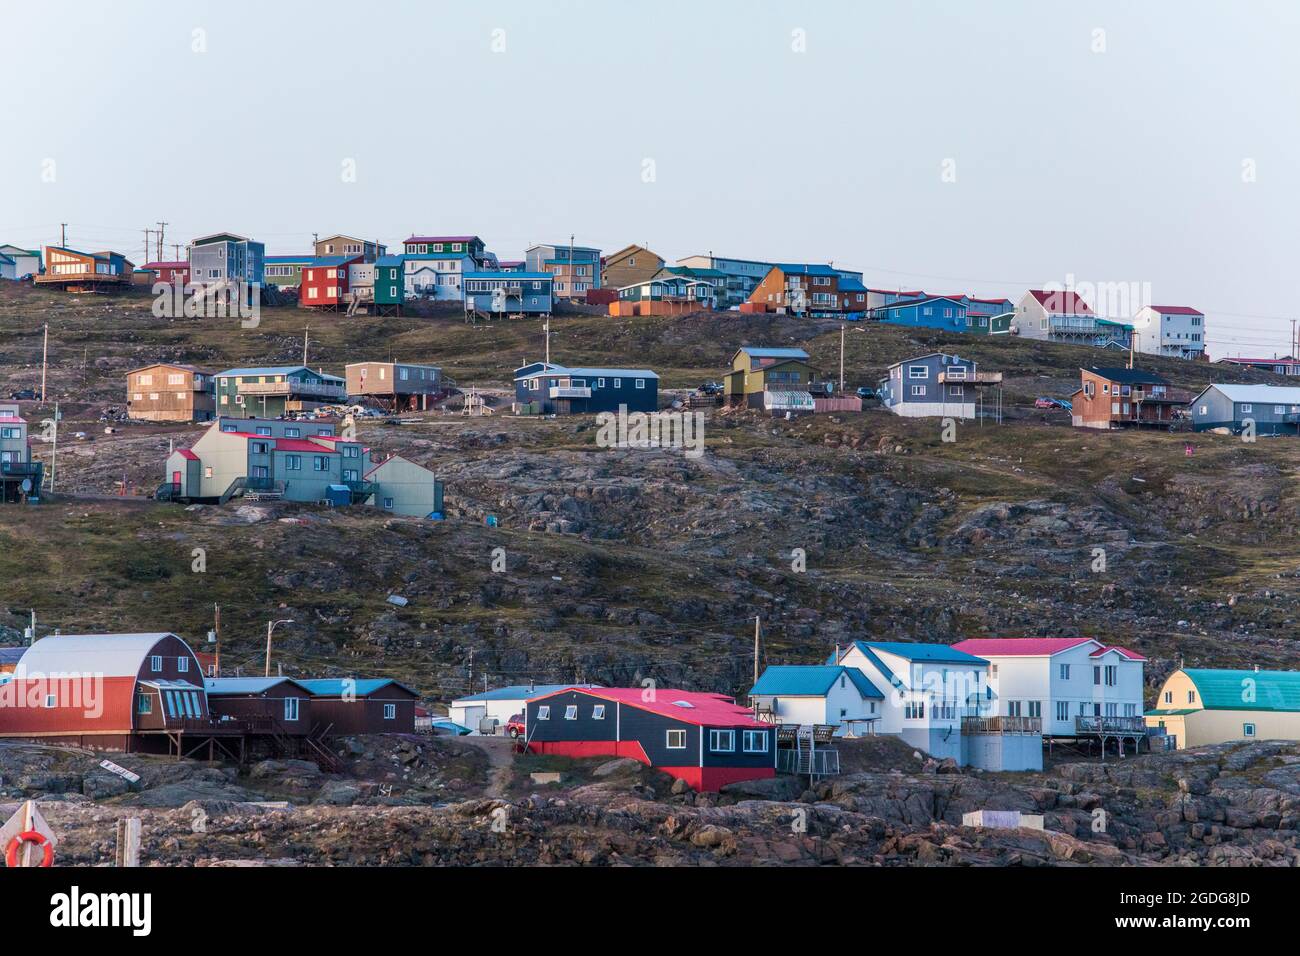 Houses perched on cliffs in the city of iqaluit, Canada. Stock Photo